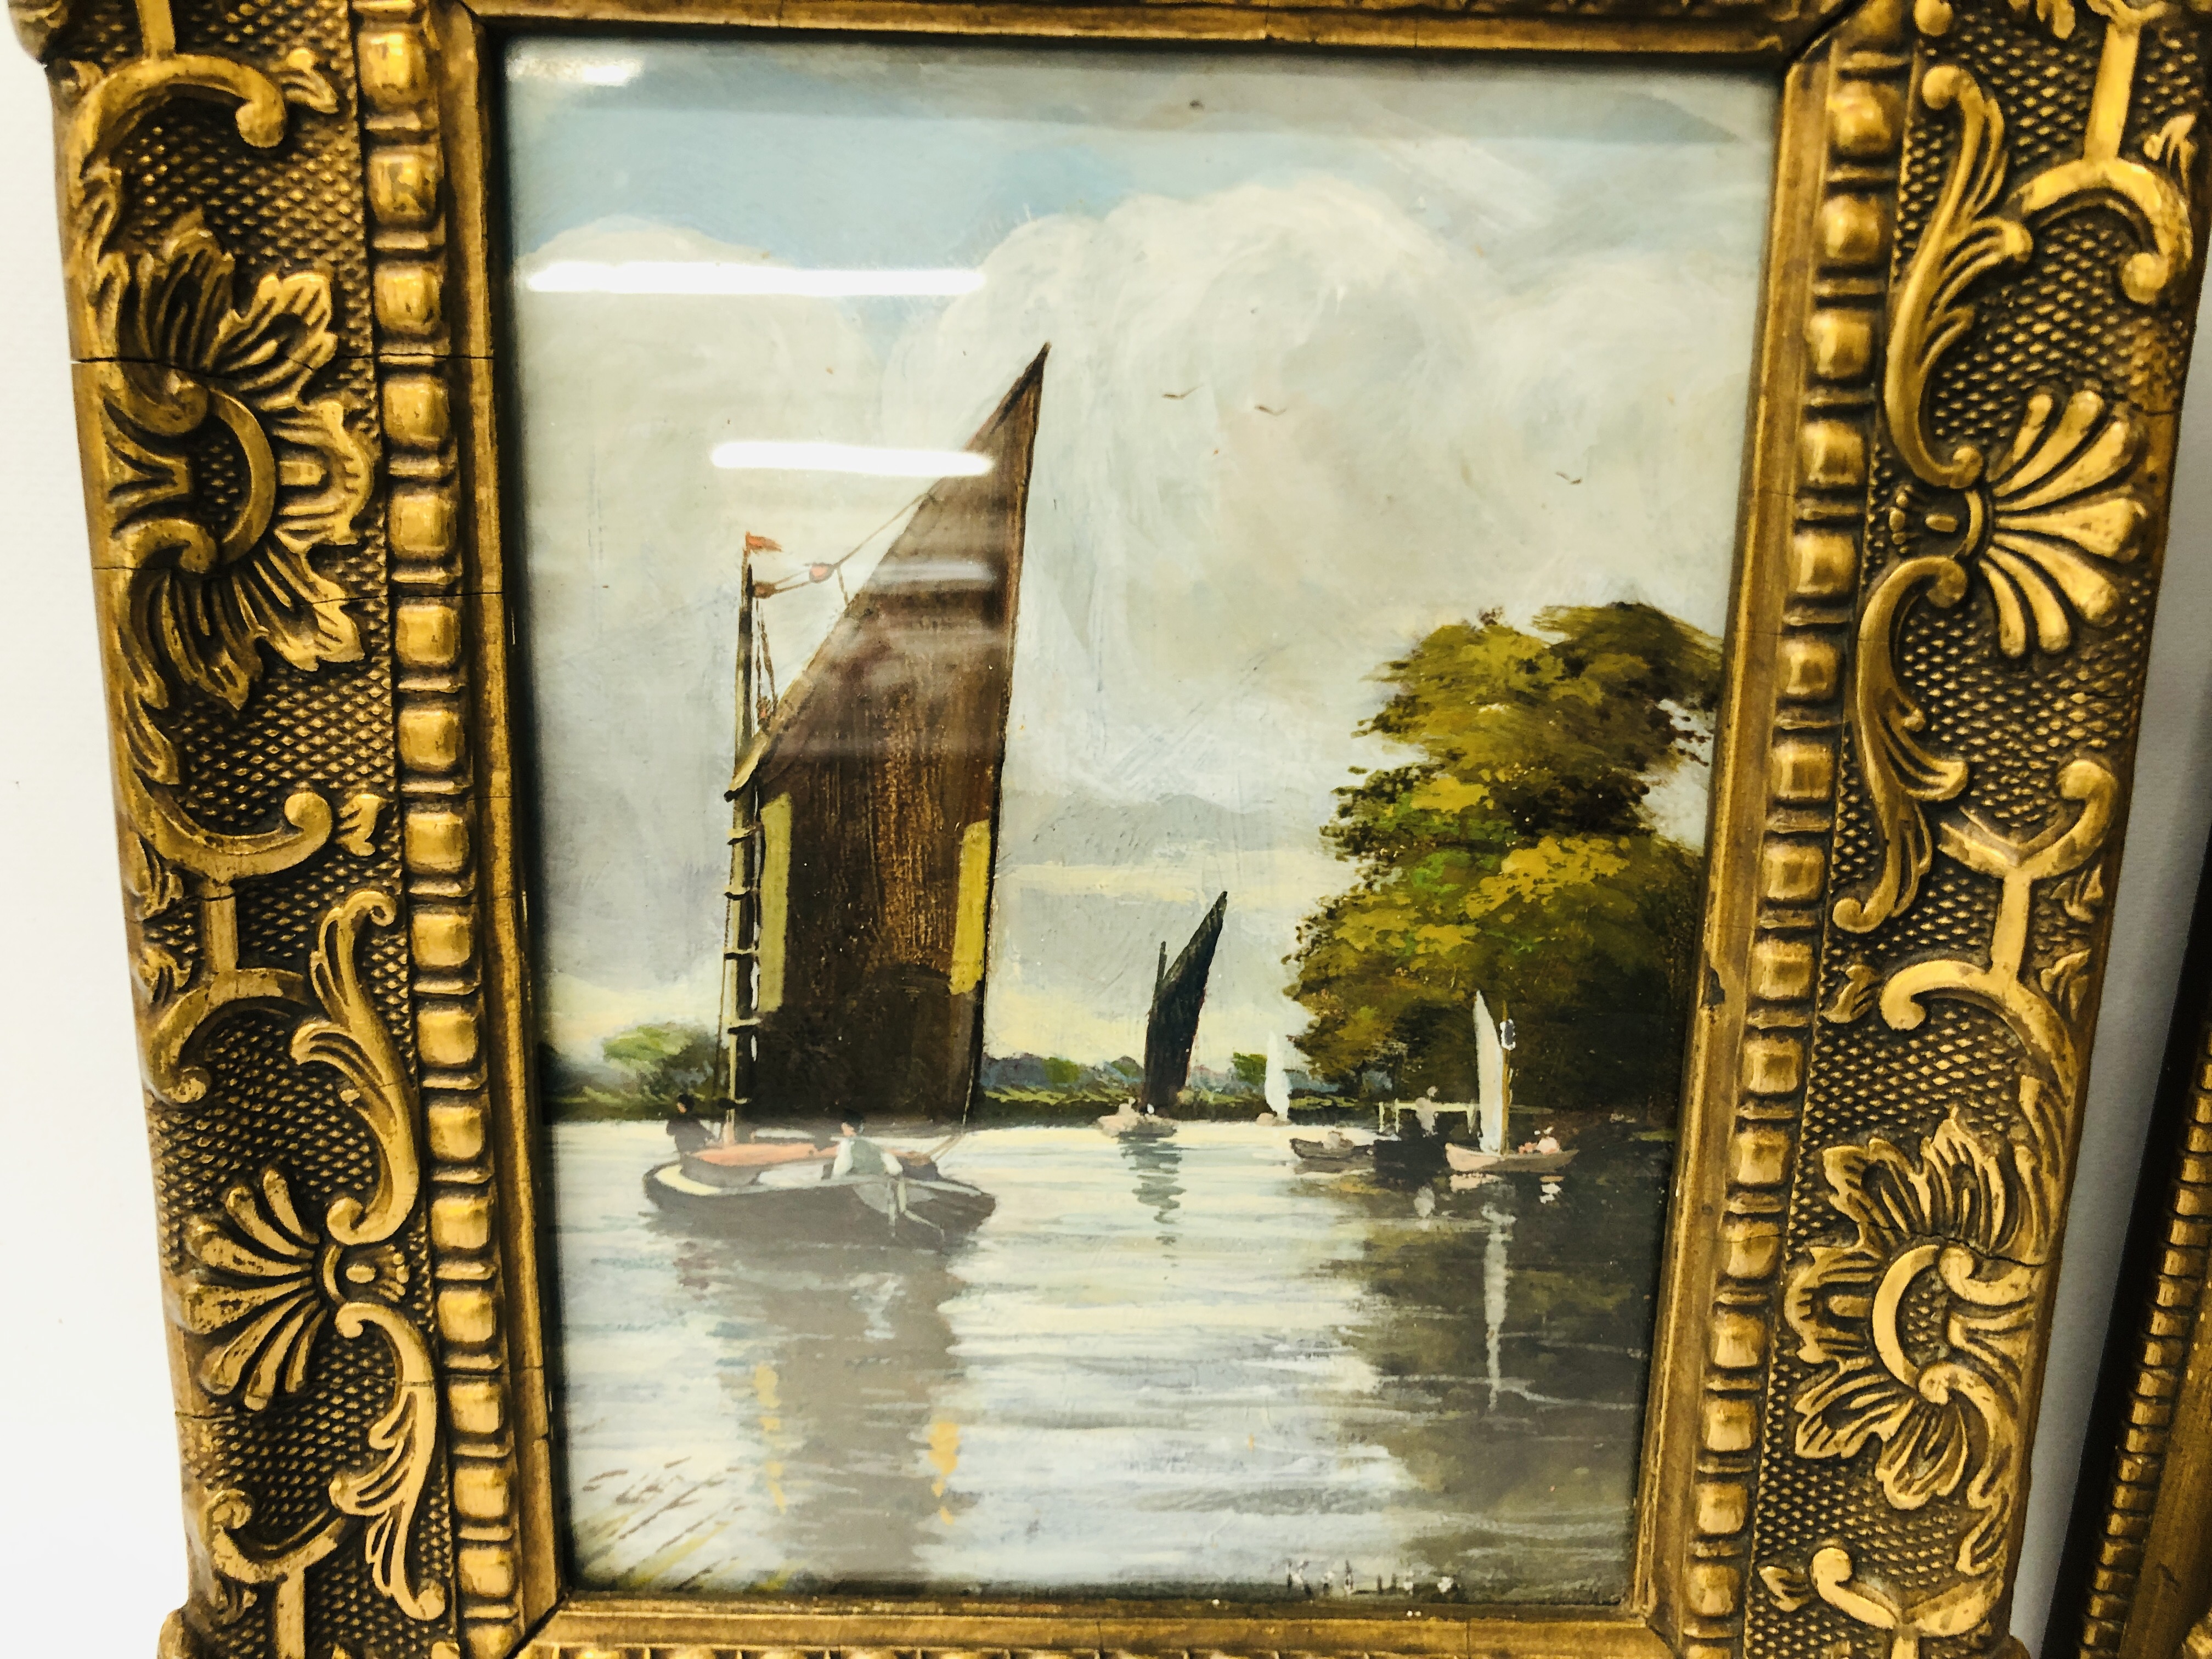 PAIR OF GILT FRAMED OIL ON BOARDS NORFOLK WHERRIES BEARING SIGNATURE KENNETH LUCK - H 19CM X W 14CM. - Image 2 of 6